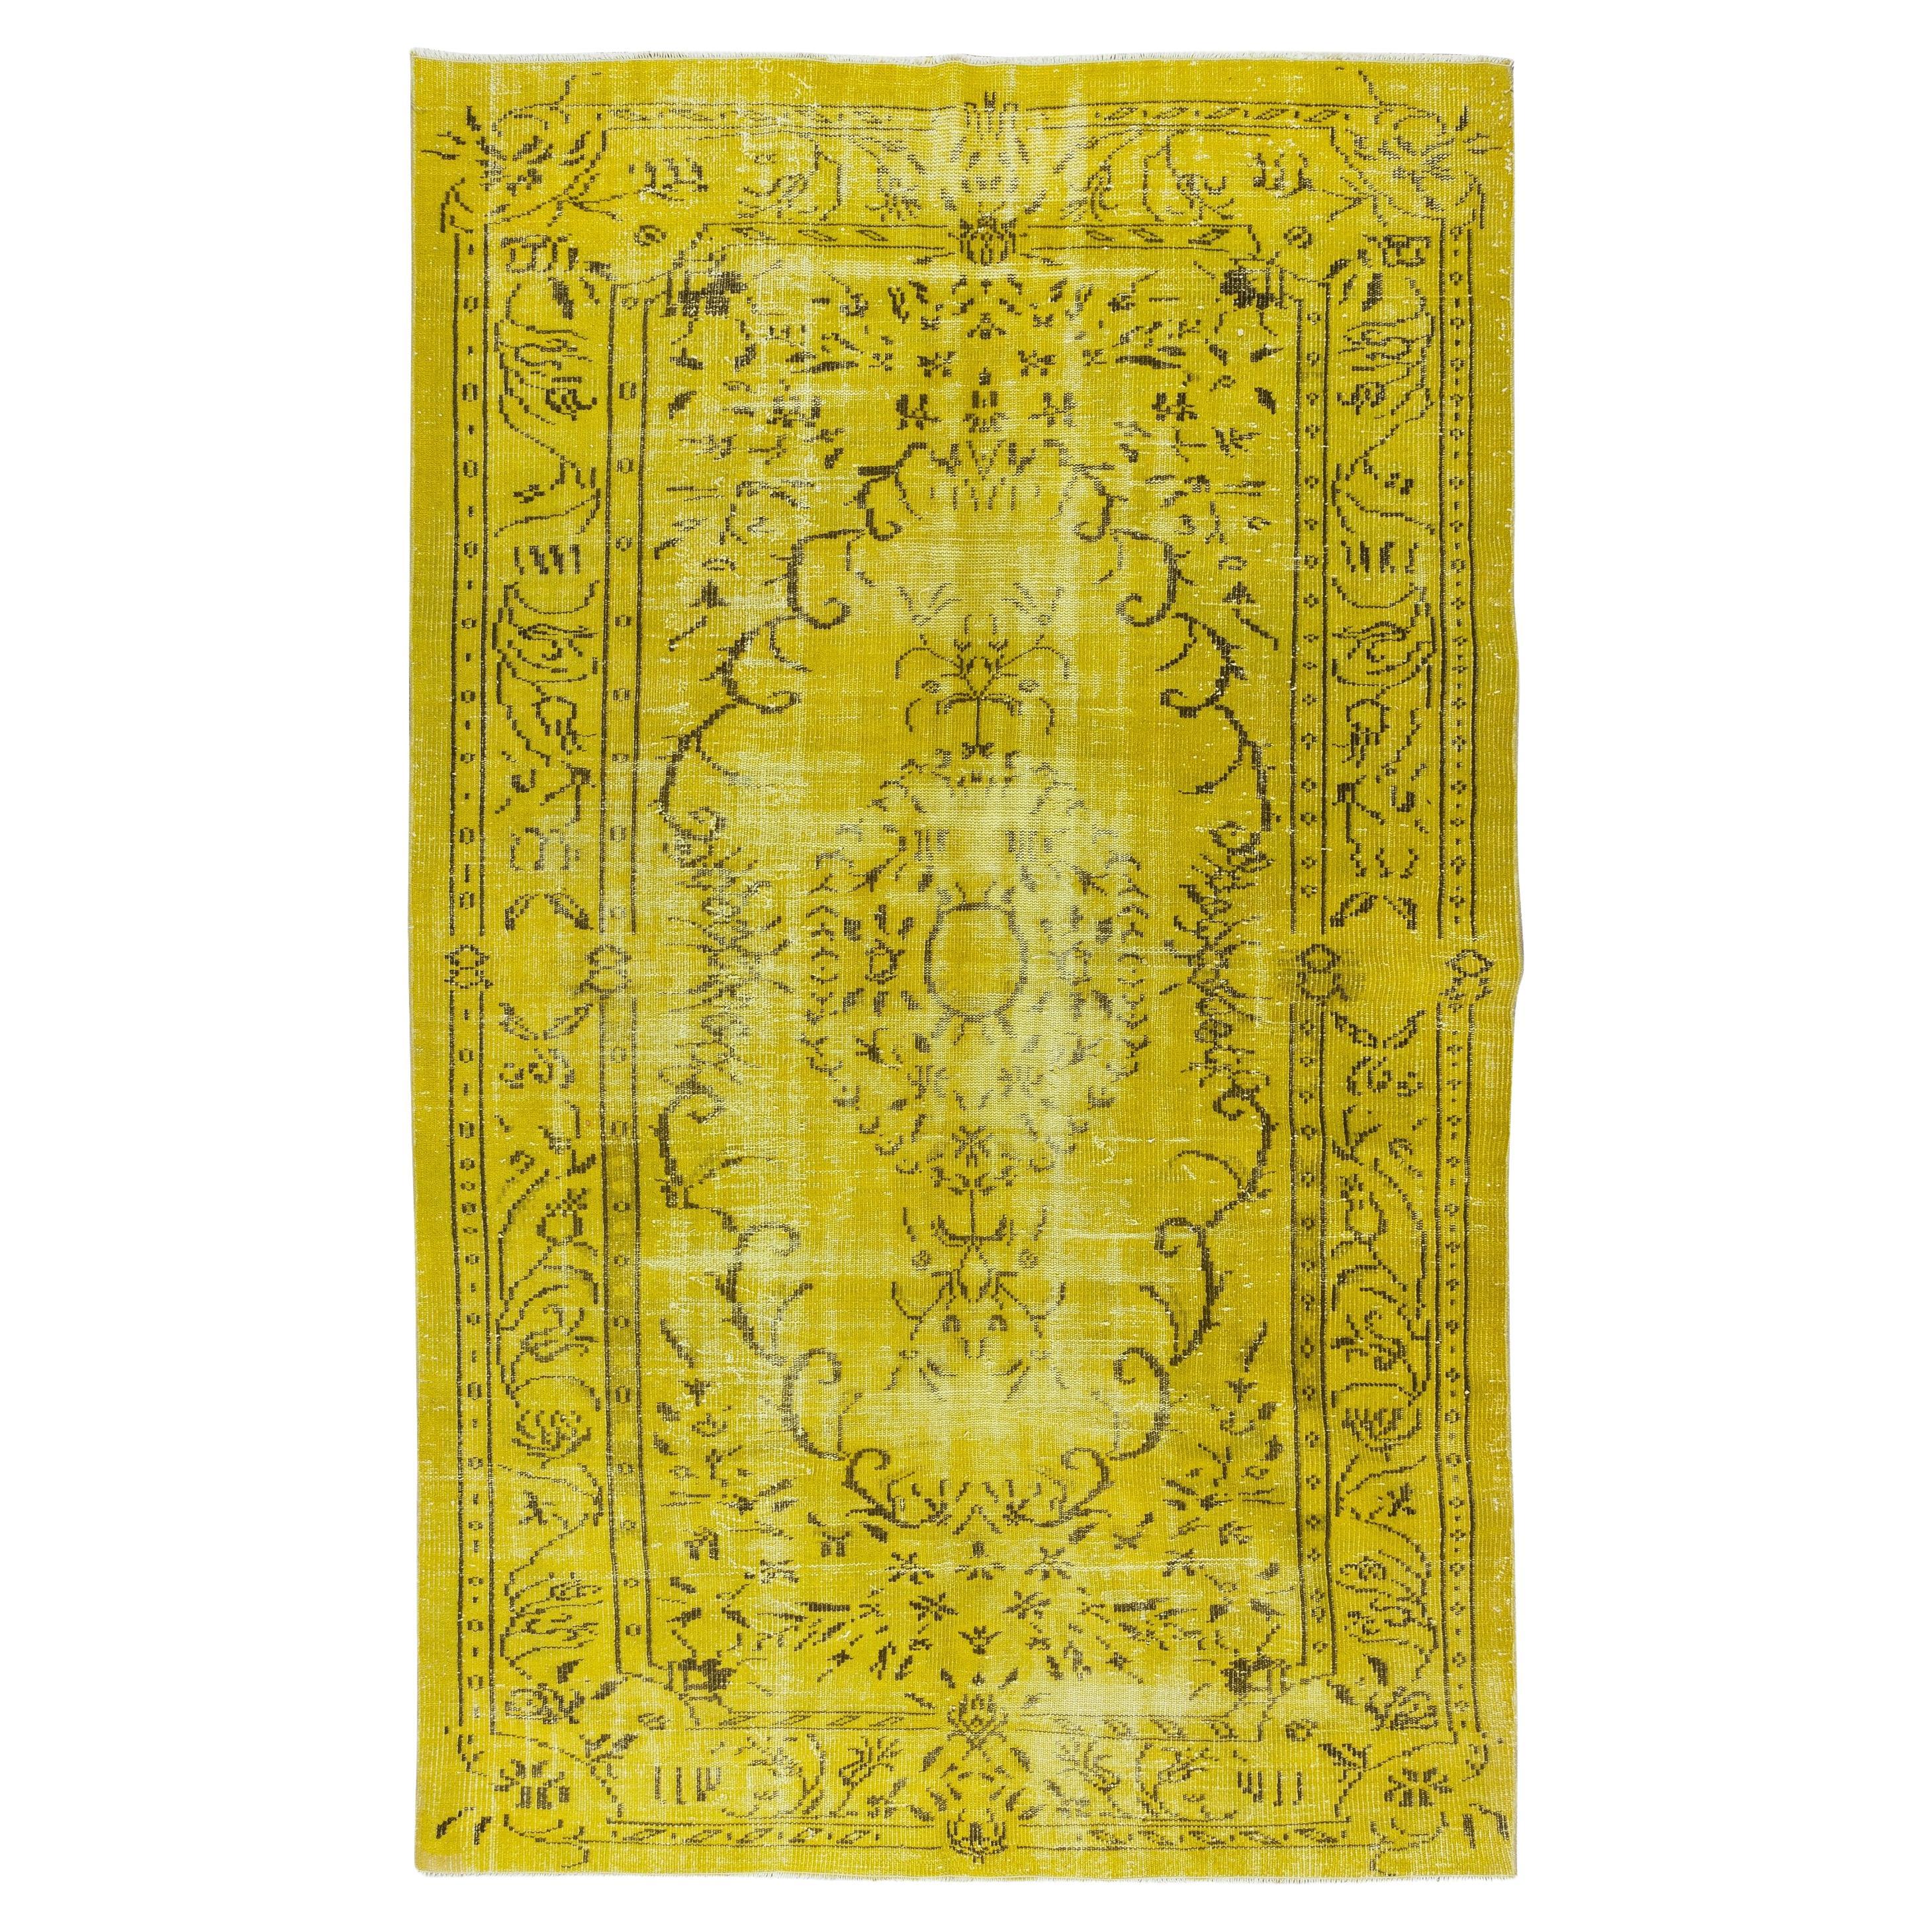 Hand Knotted Yellow Overdyed Wool Rug, Vintage Carpet from Turkey